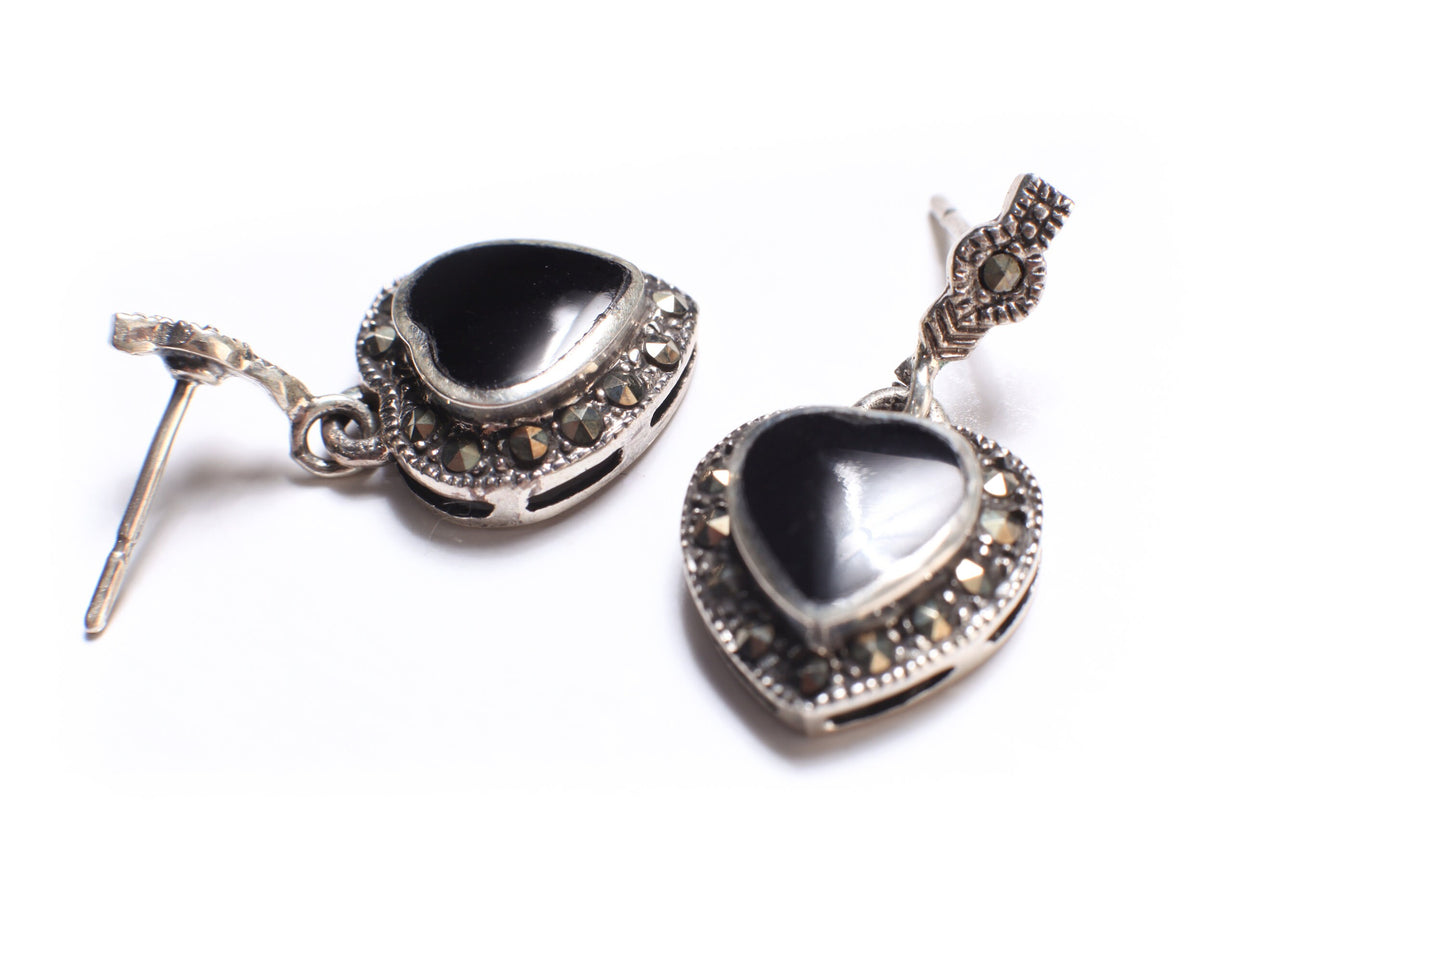 Marcasite 925 Sterling Silver Earrings Post with Dangle Black Onyx Heart Shape Vintage, Antique Marcasite Earrings Gift for her